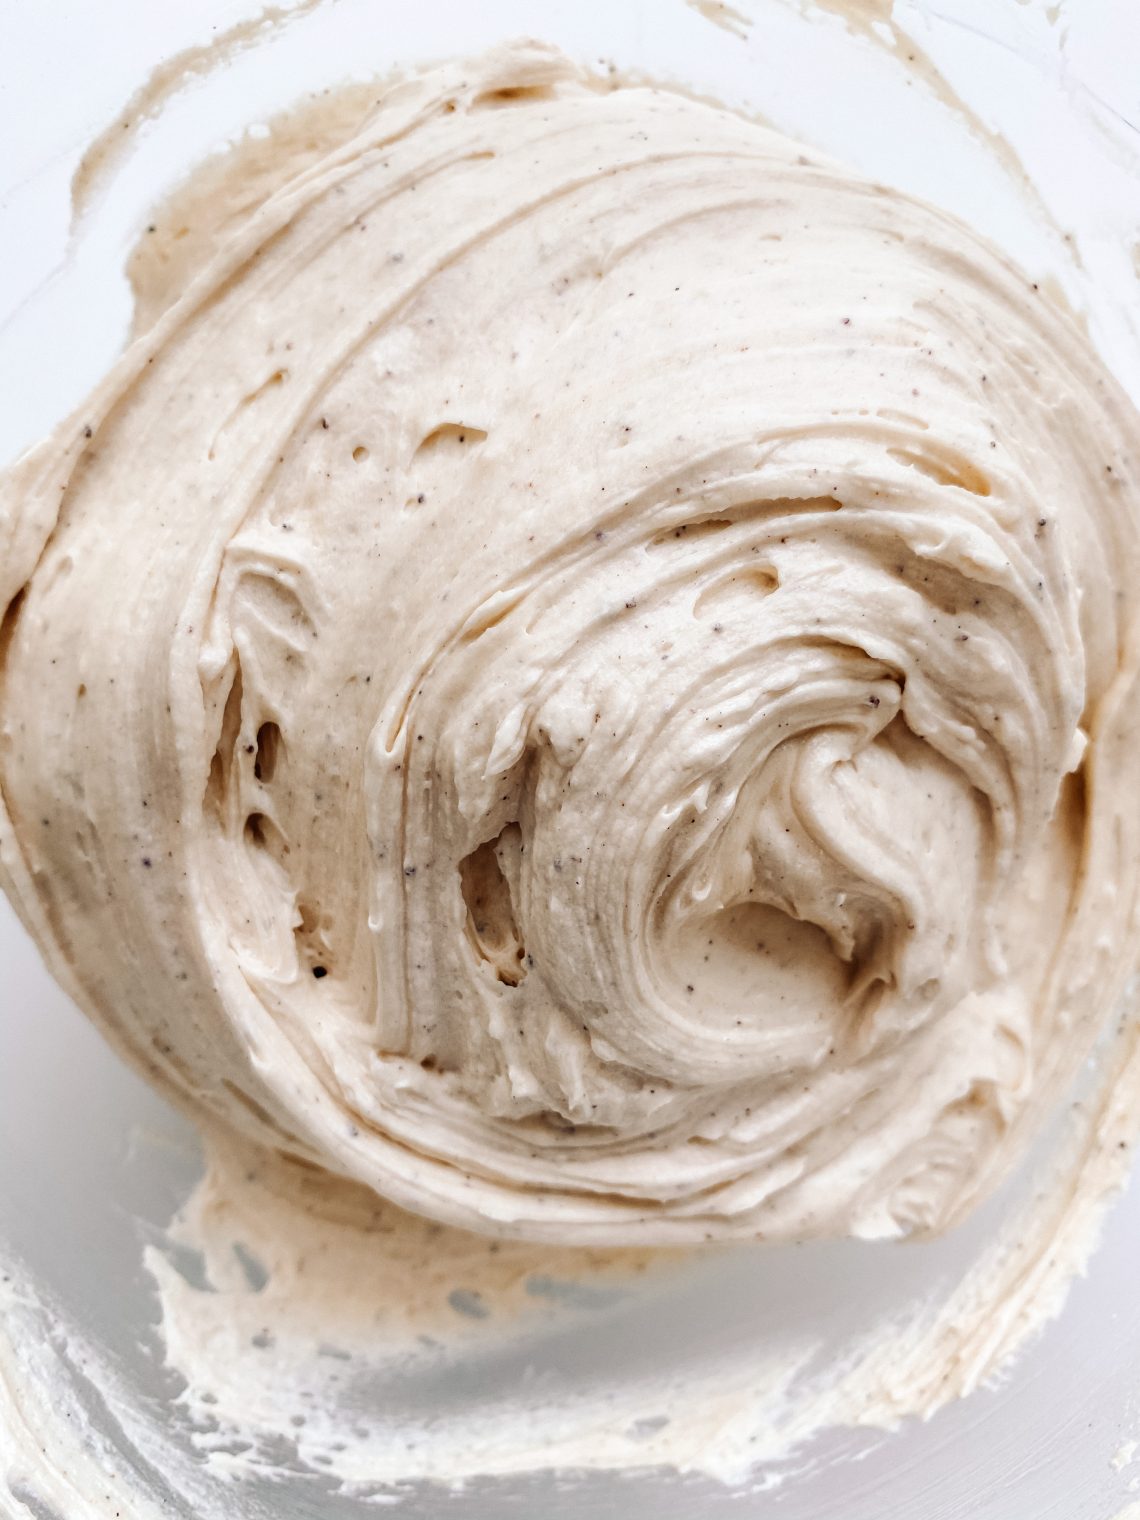 Photograph of Brown Butter Ricotta Frosting